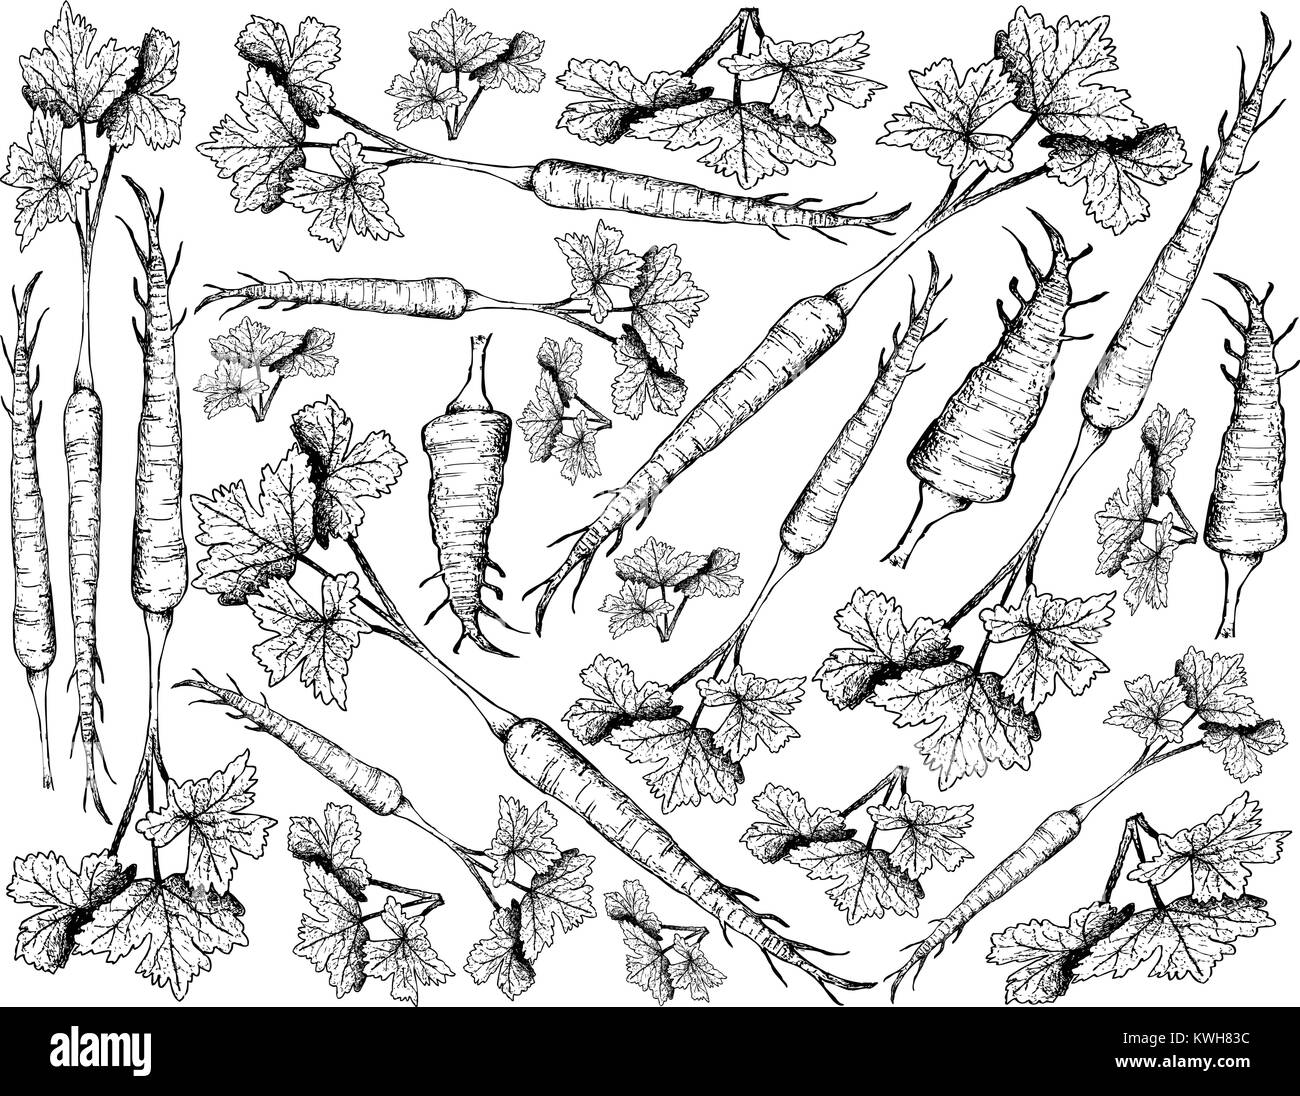 Root and Tuberous Vegetables, Illustration Hand Drawn Sketch of Fresh Parsnip with Root on Leaves Used for Seasoning in Cooking. Isolated on White Bac Stock Vector